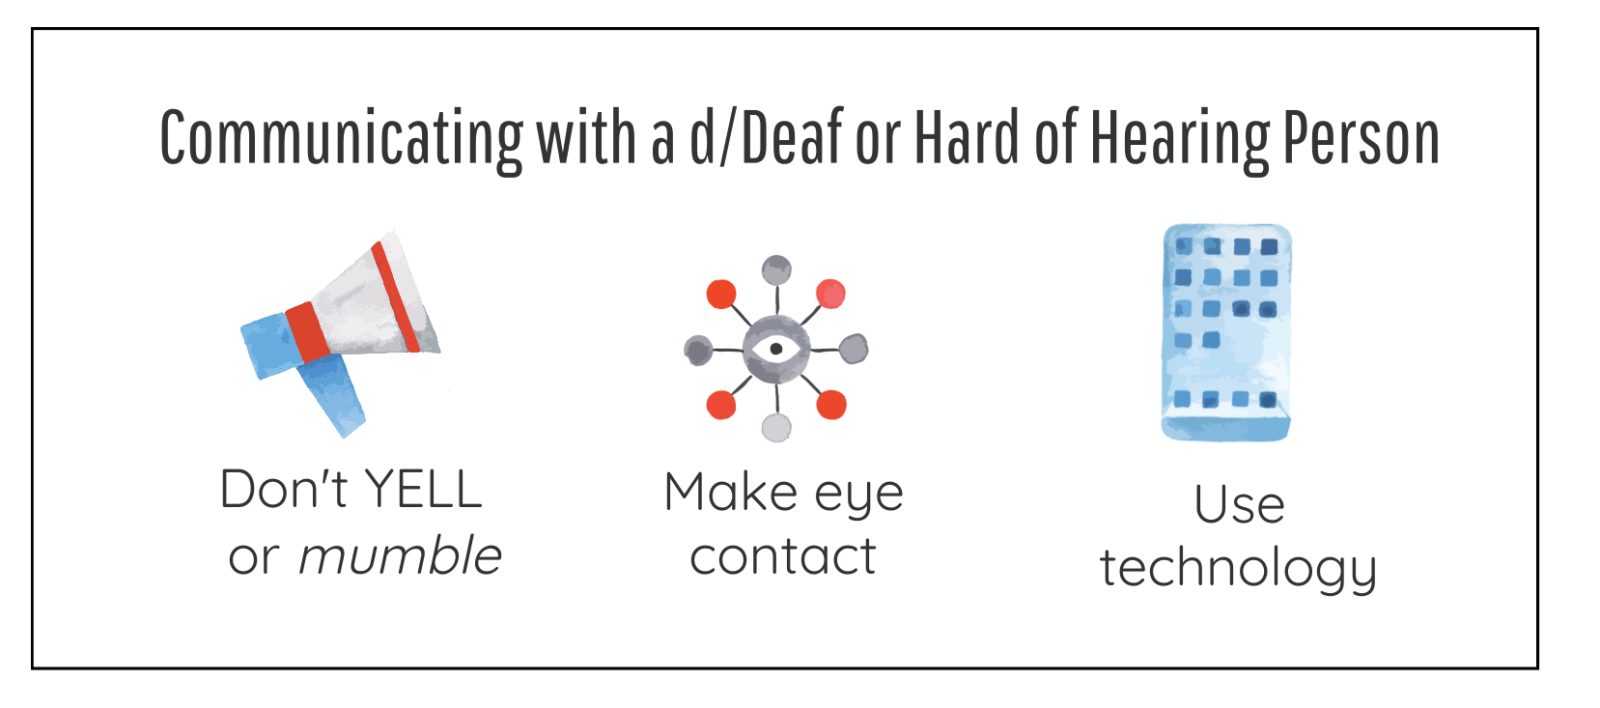 Communicating with a d/Deaf of Hard or Hearing Person don't yell or mumble, make eye contact and use technology